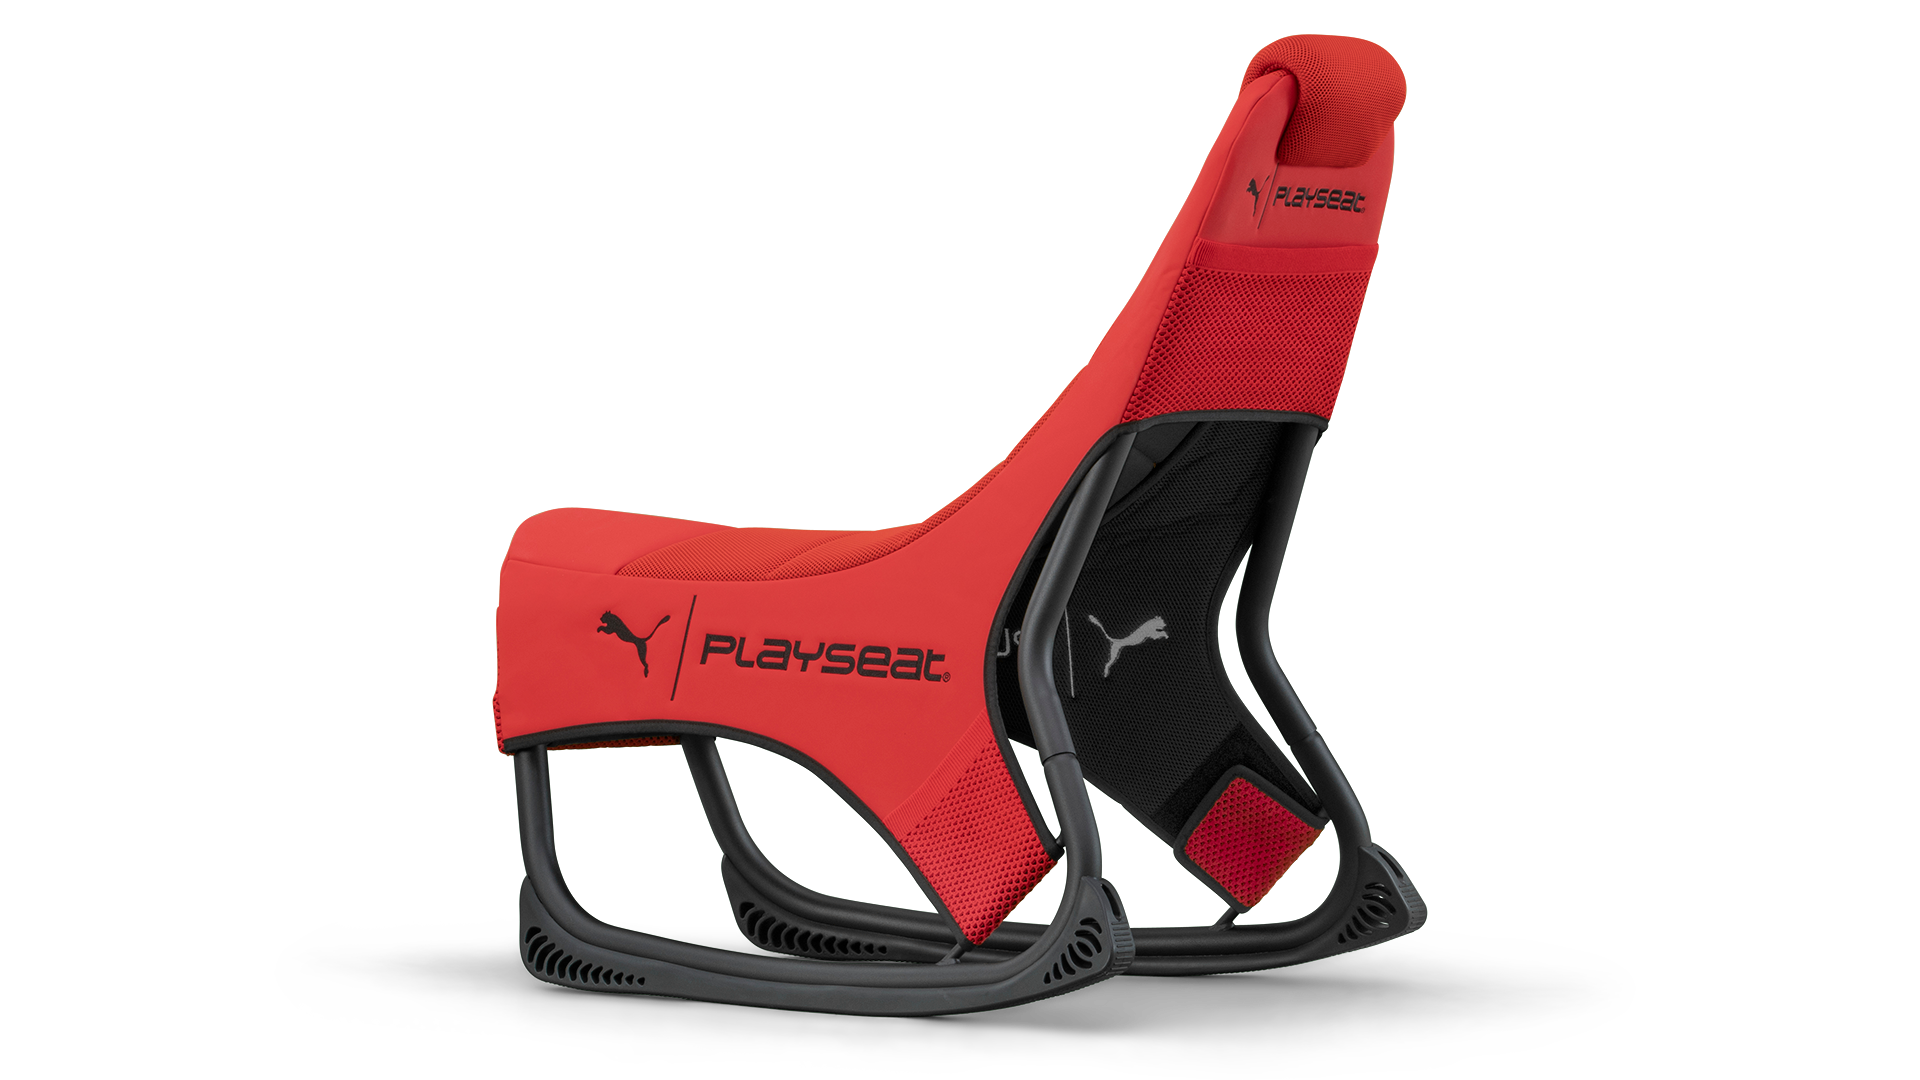 playseat-go-puma-active-red-gaming-seat-back-angle-view-1920x1080.png